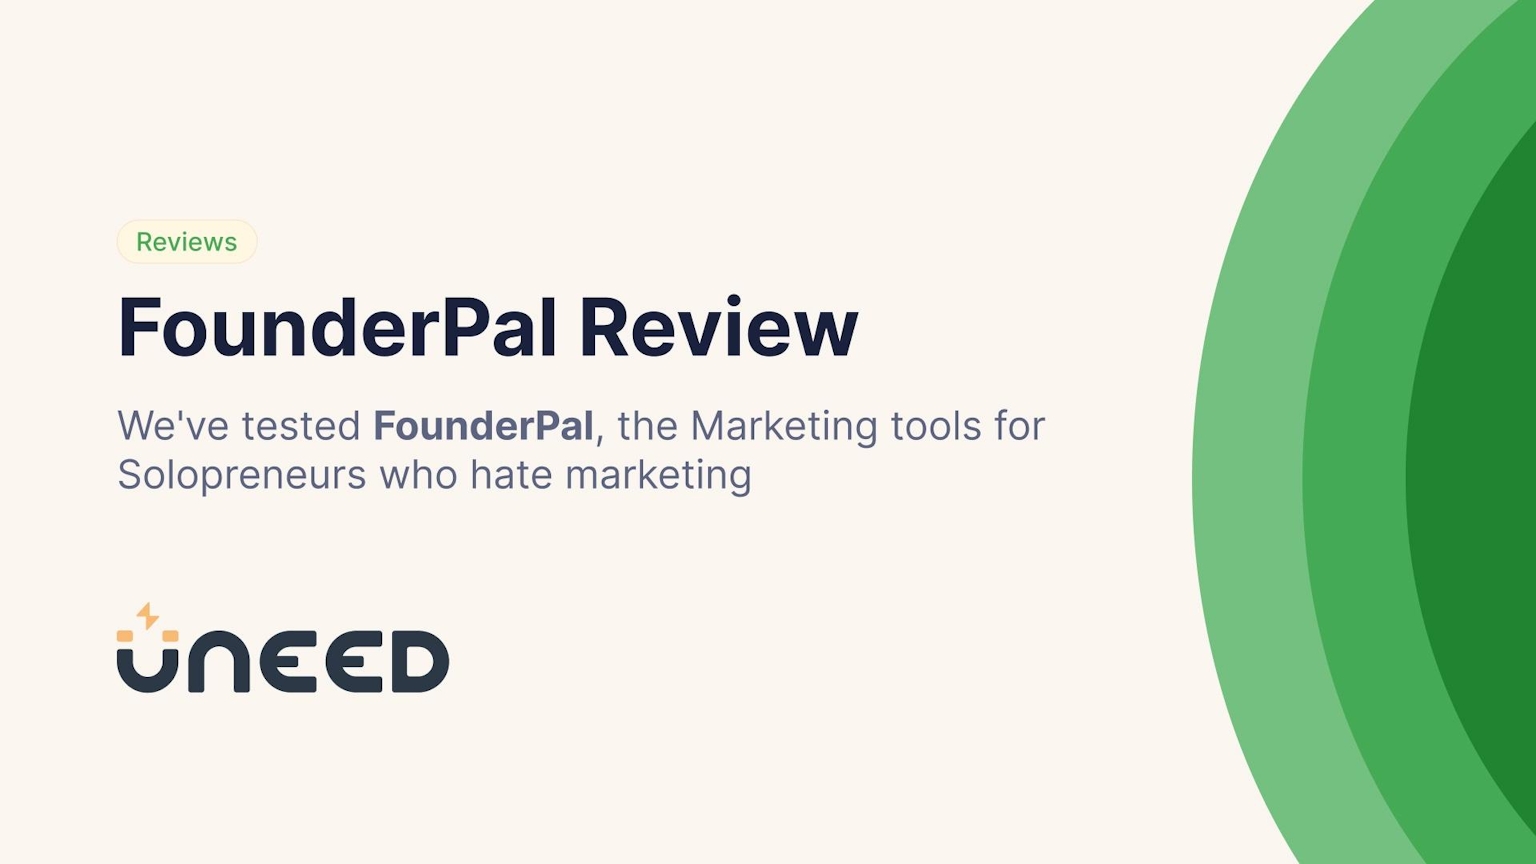 FounderPal Review